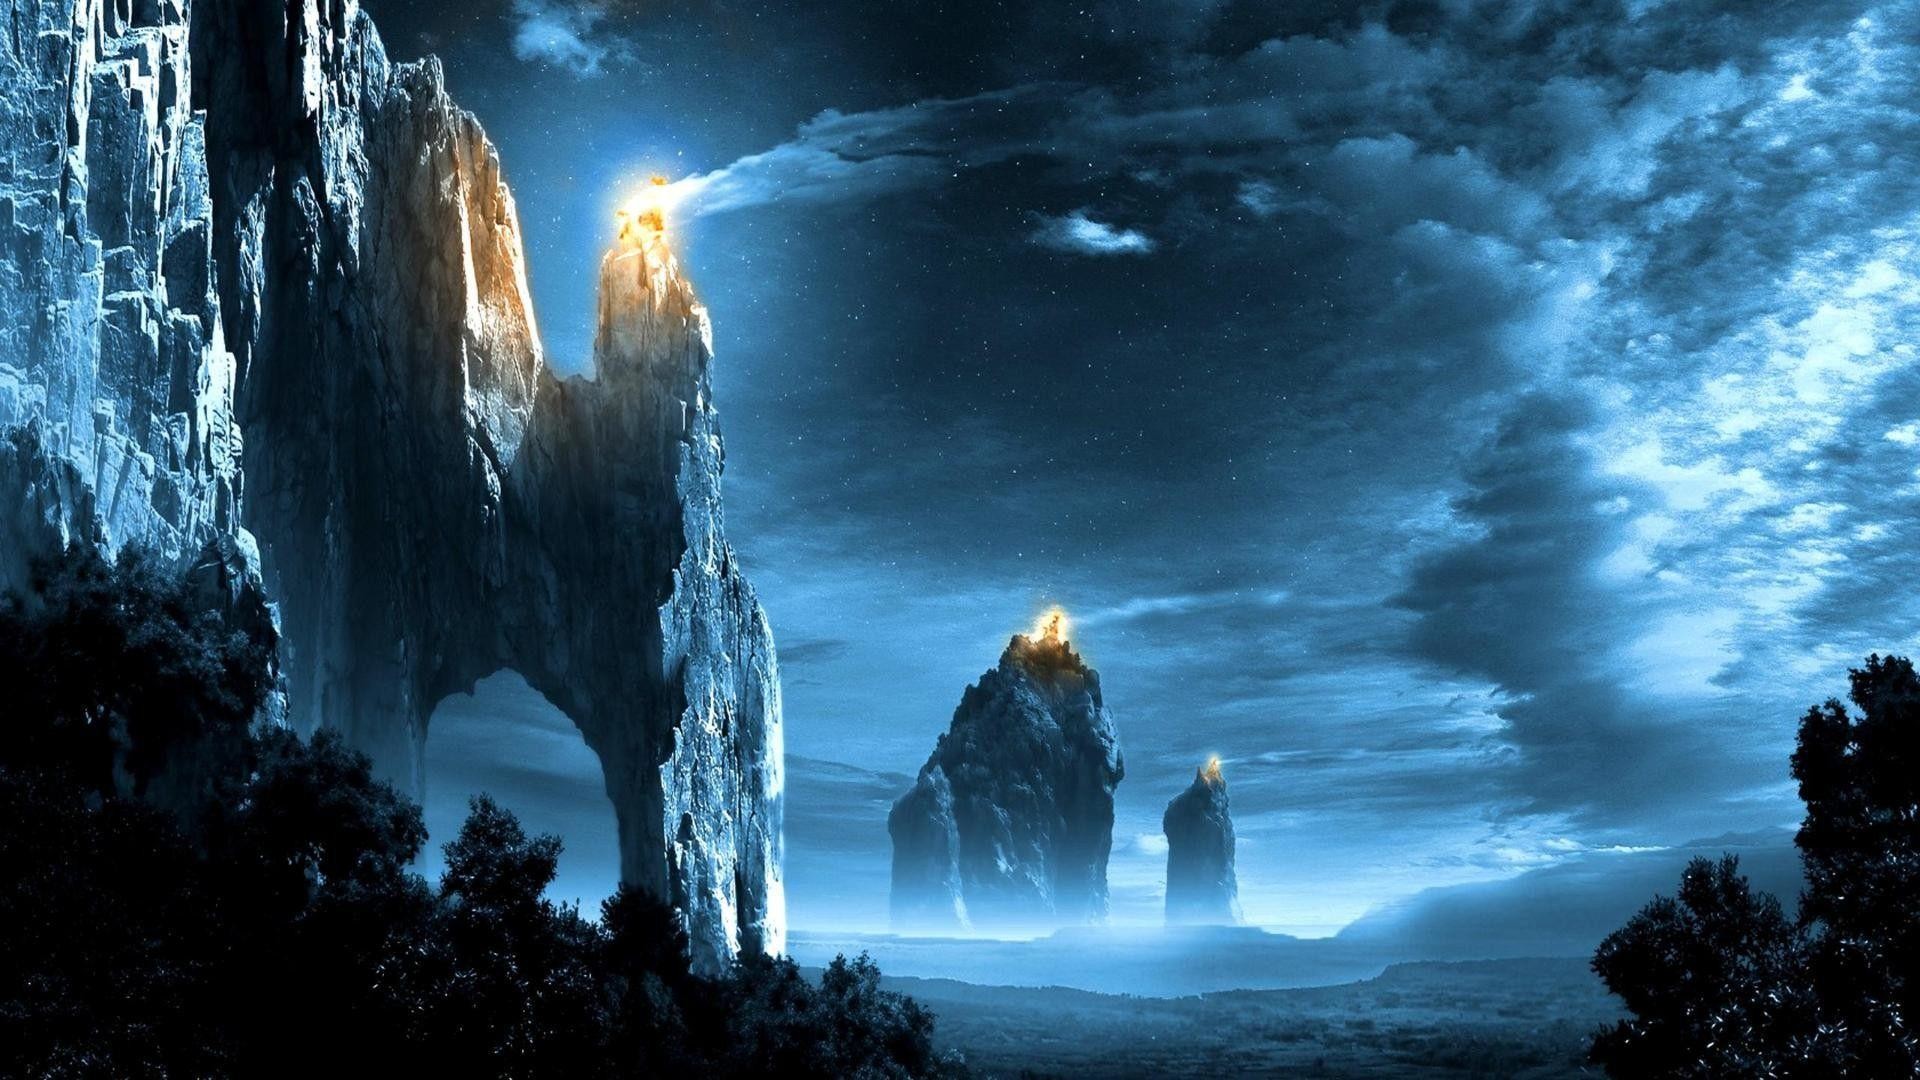 1920x1080 Fantasy art landscapes fire signal lord rings games wallpaper .